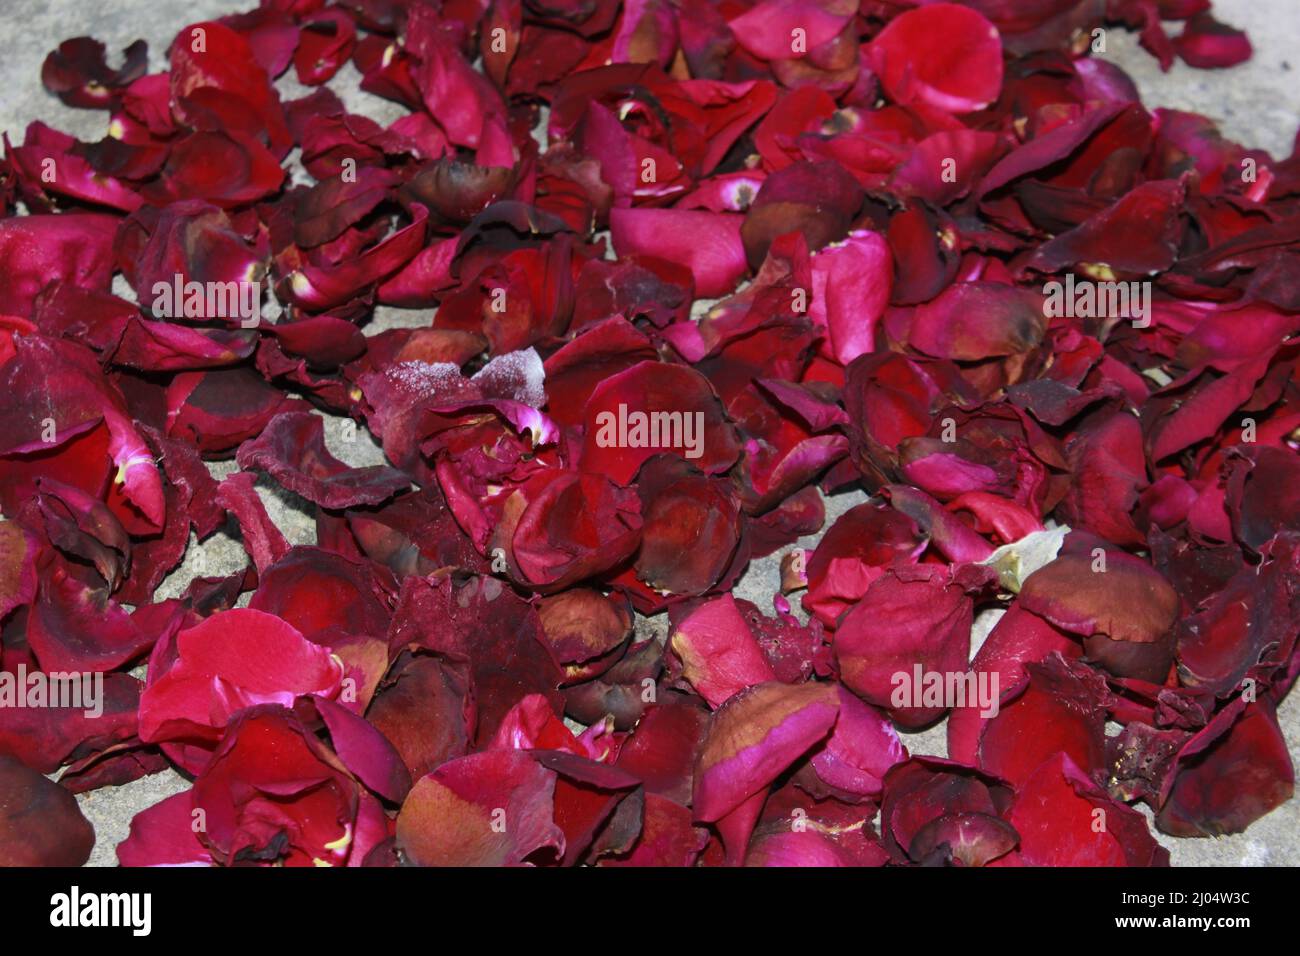 Dark red dried rose fragrant petals close up, Dark red dried rose flower on dry fragrant petals soft background. Stock Photo